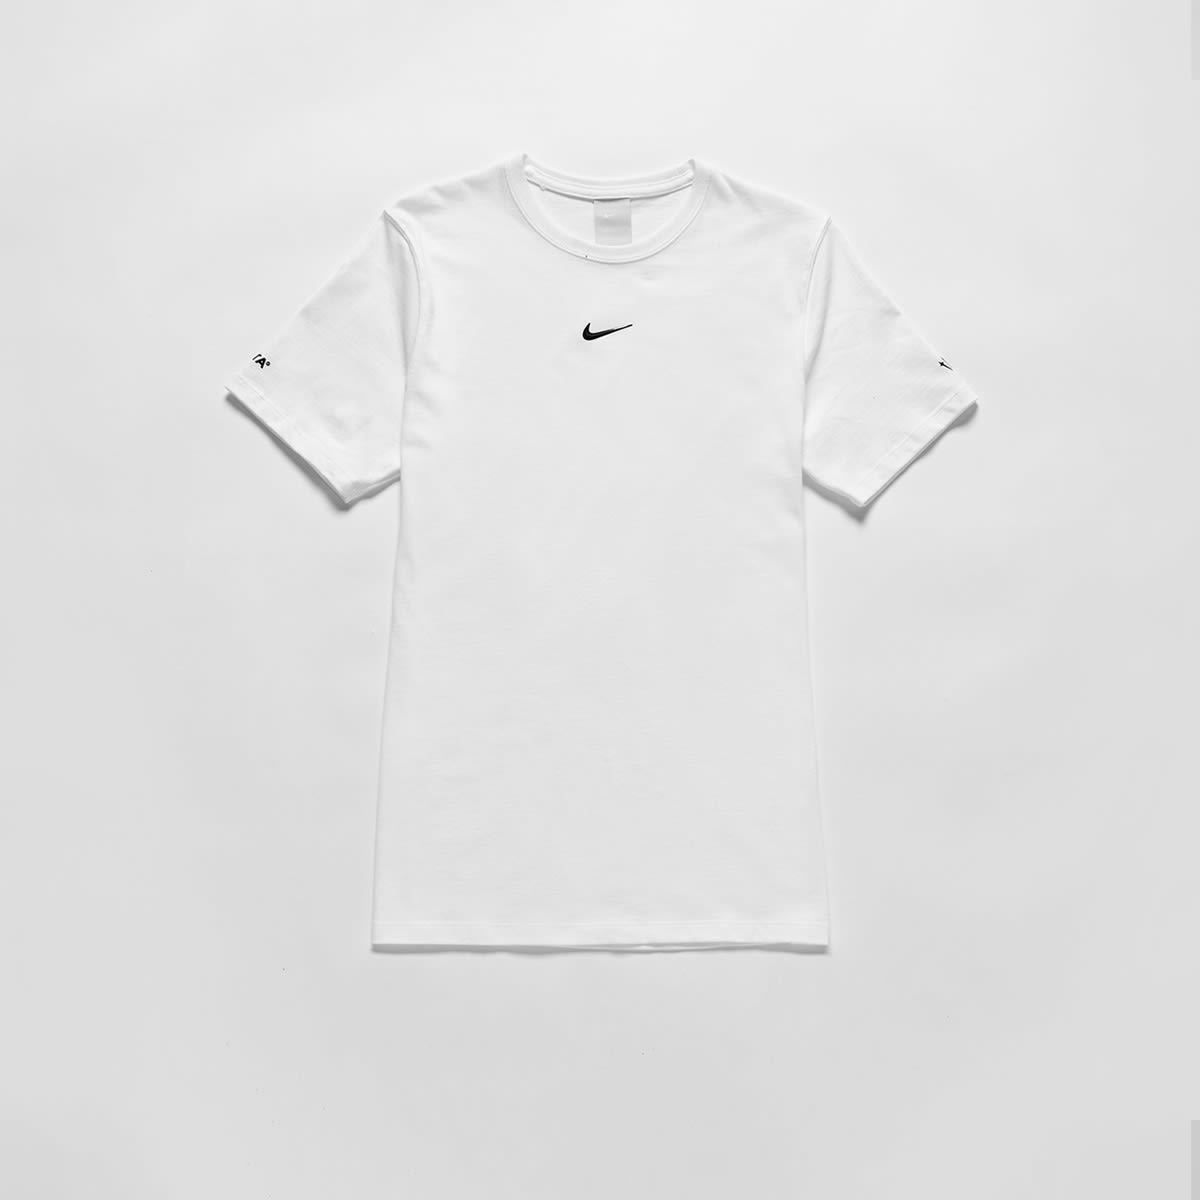 Nike x NOCTA Tee (White) | END. Launches